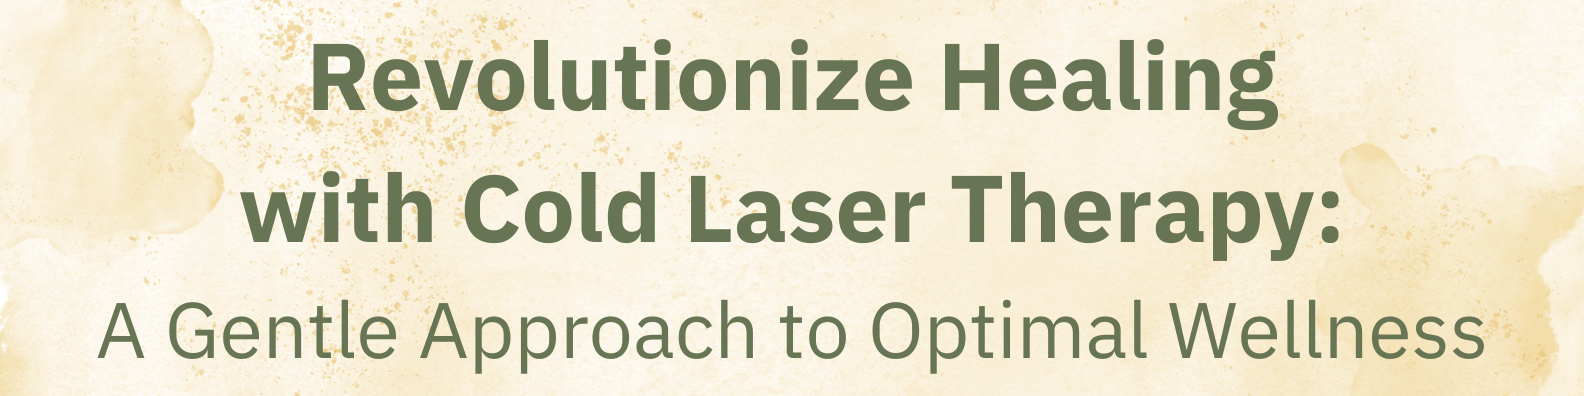 Cold Laser Therapy Header